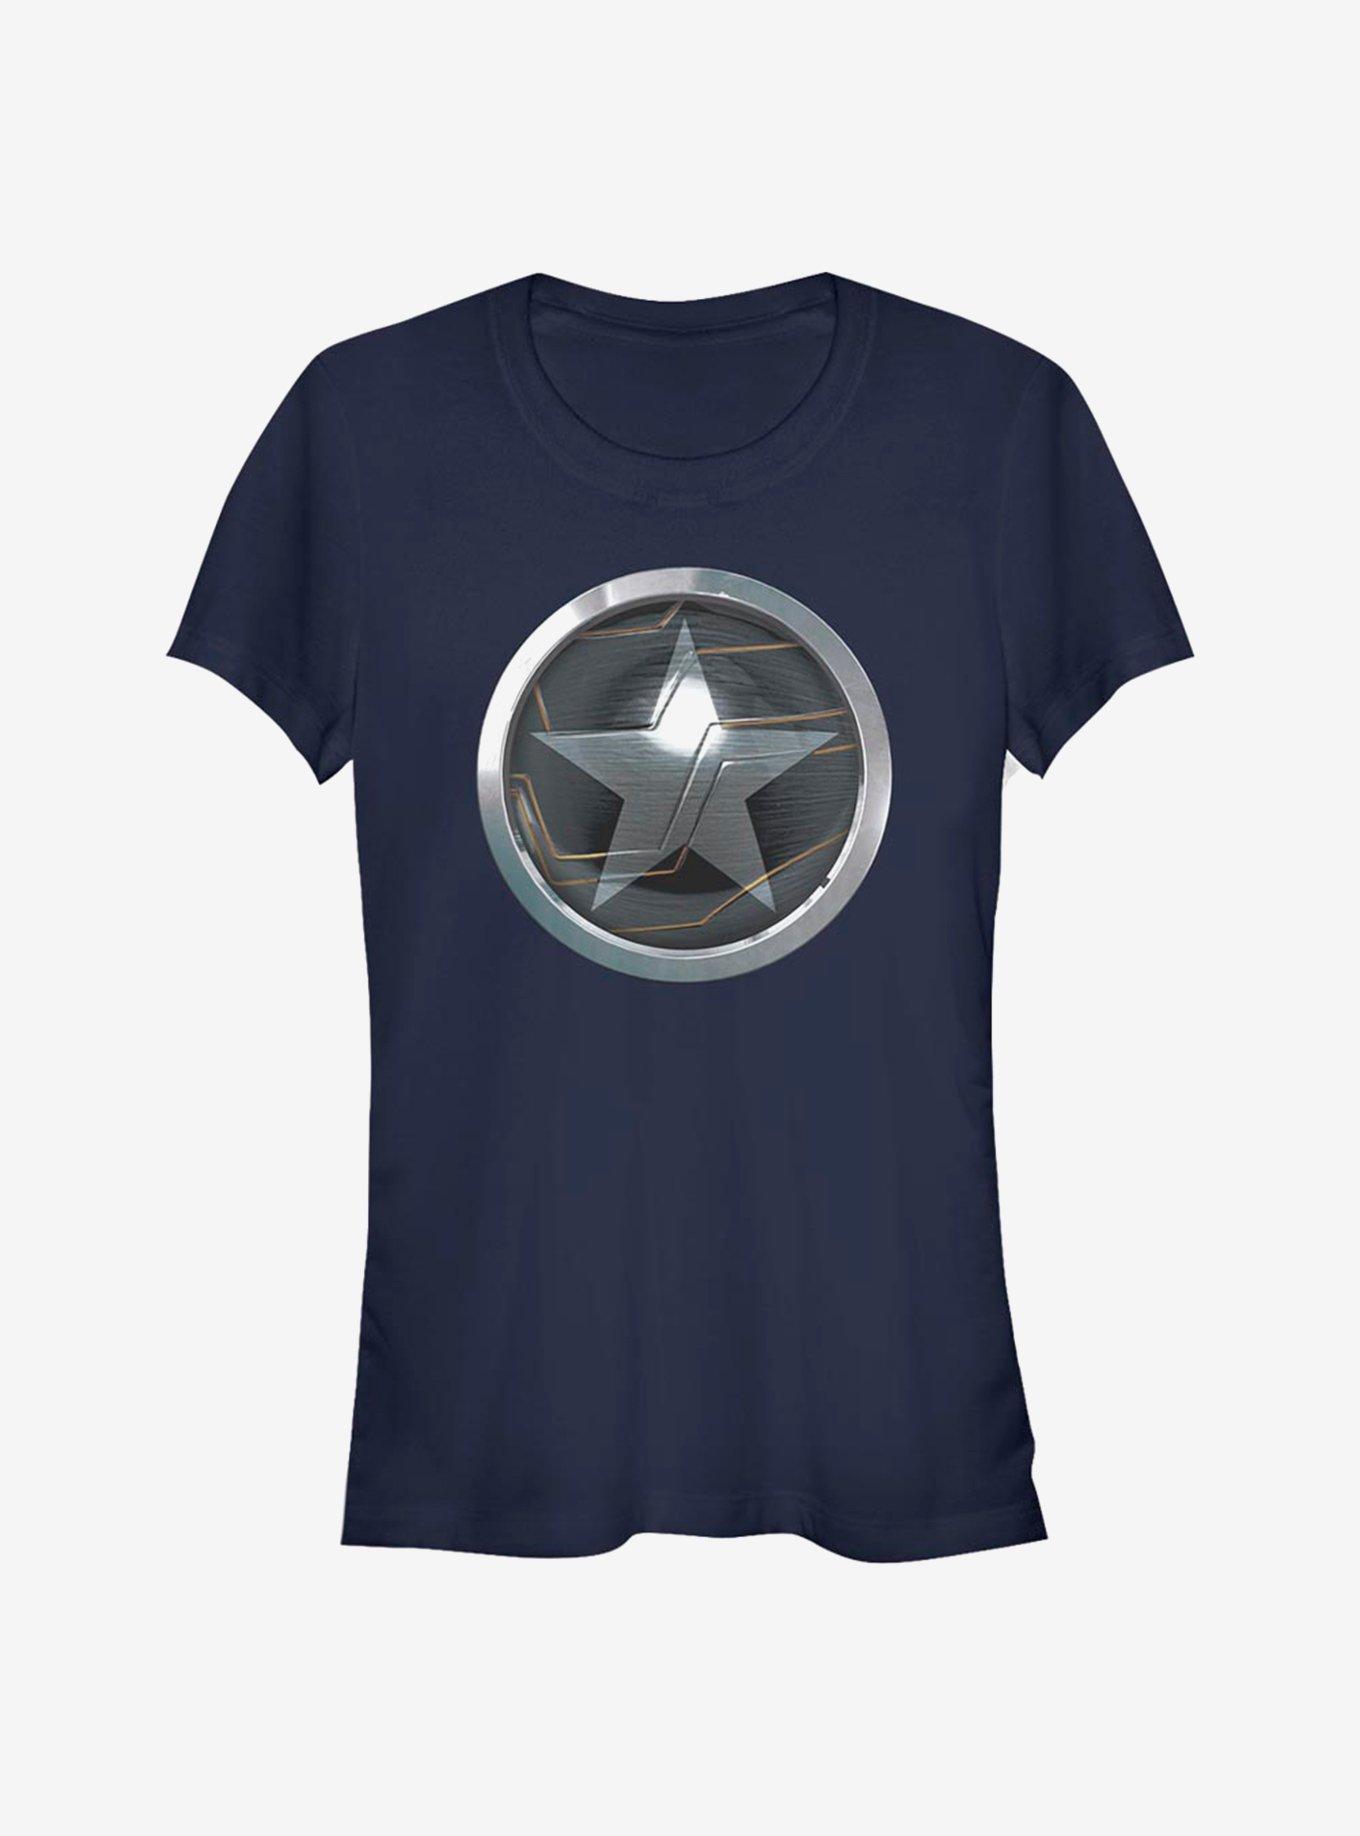 Marvel The Falcon And The Winter Soldier Logo Girls T-Shirt, NAVY, hi-res